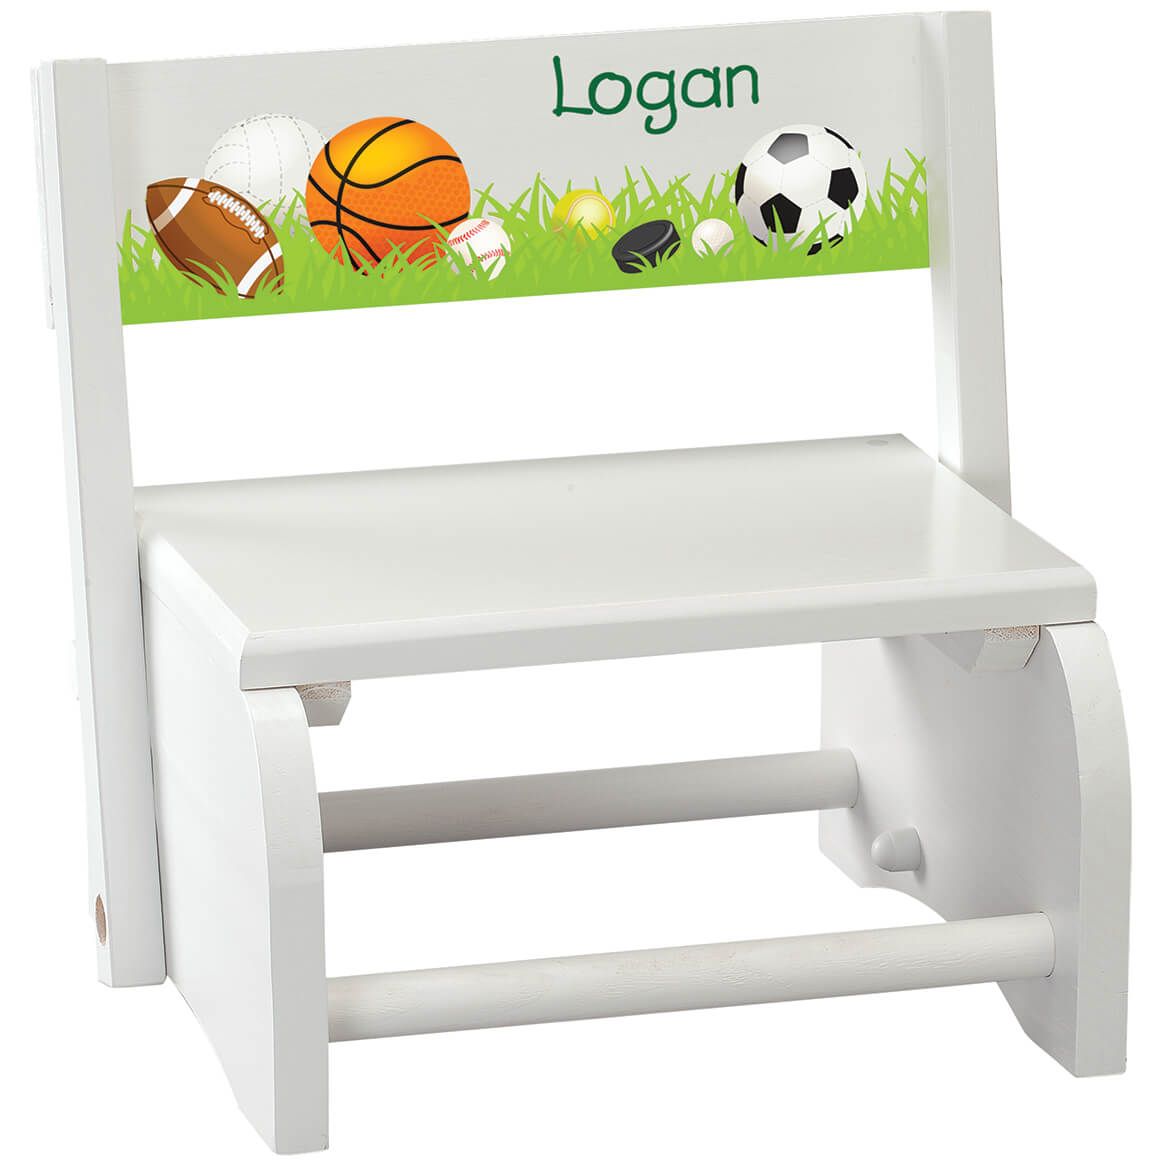 Personalized Children's White Sports Step Stool + '-' + 368494